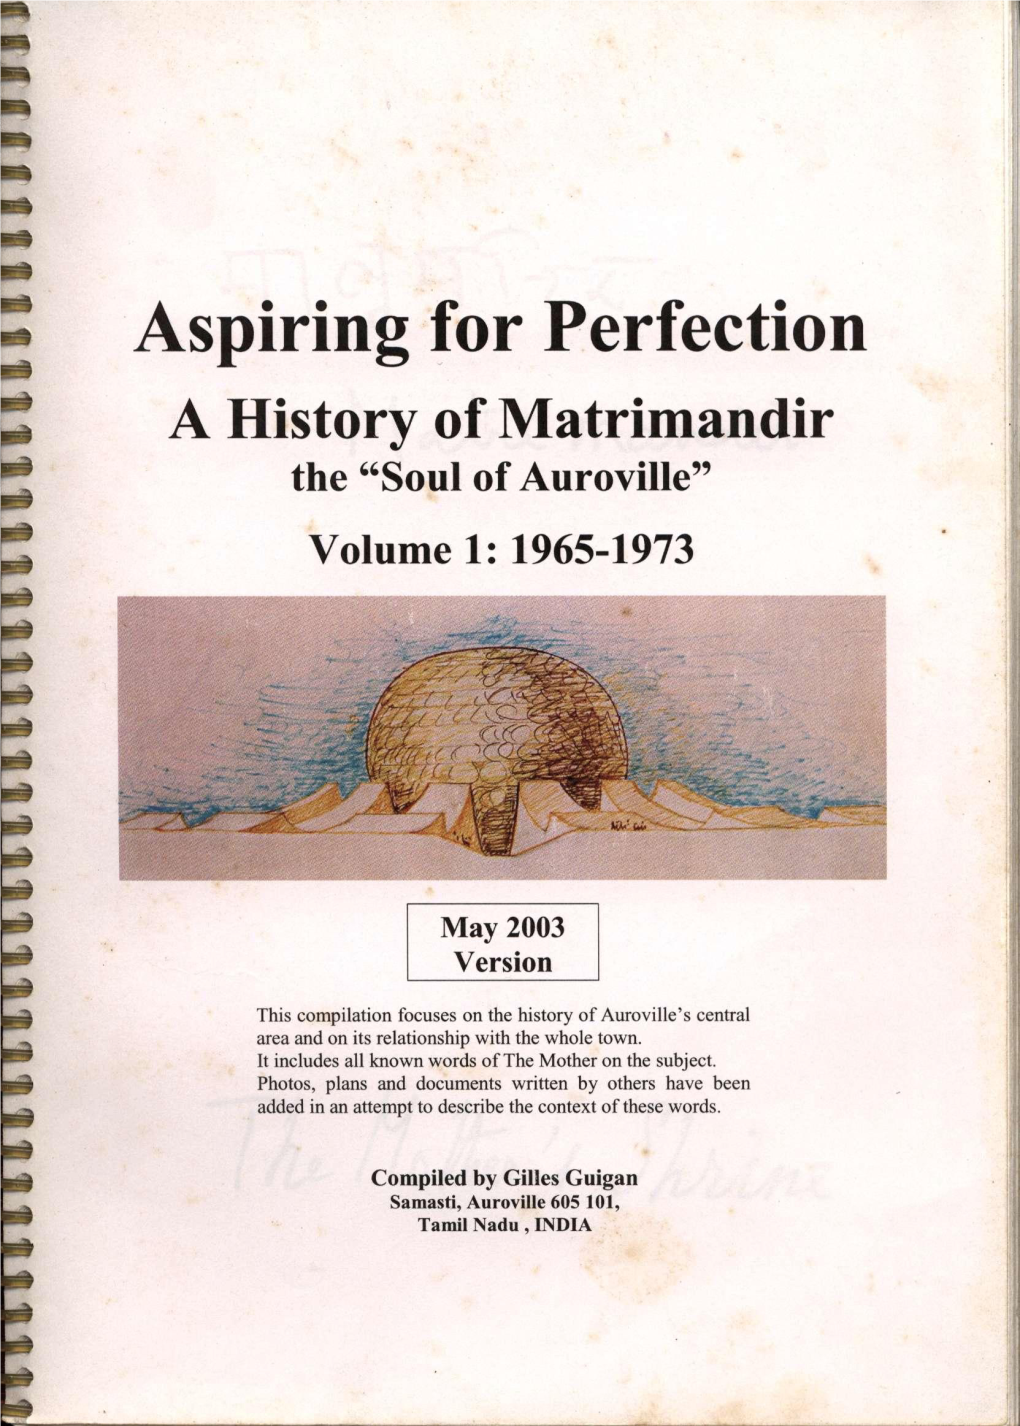 Aspiring for Perfection a History of Matrimandir the "Soul of Auroville" Volume 1: 1965-1973